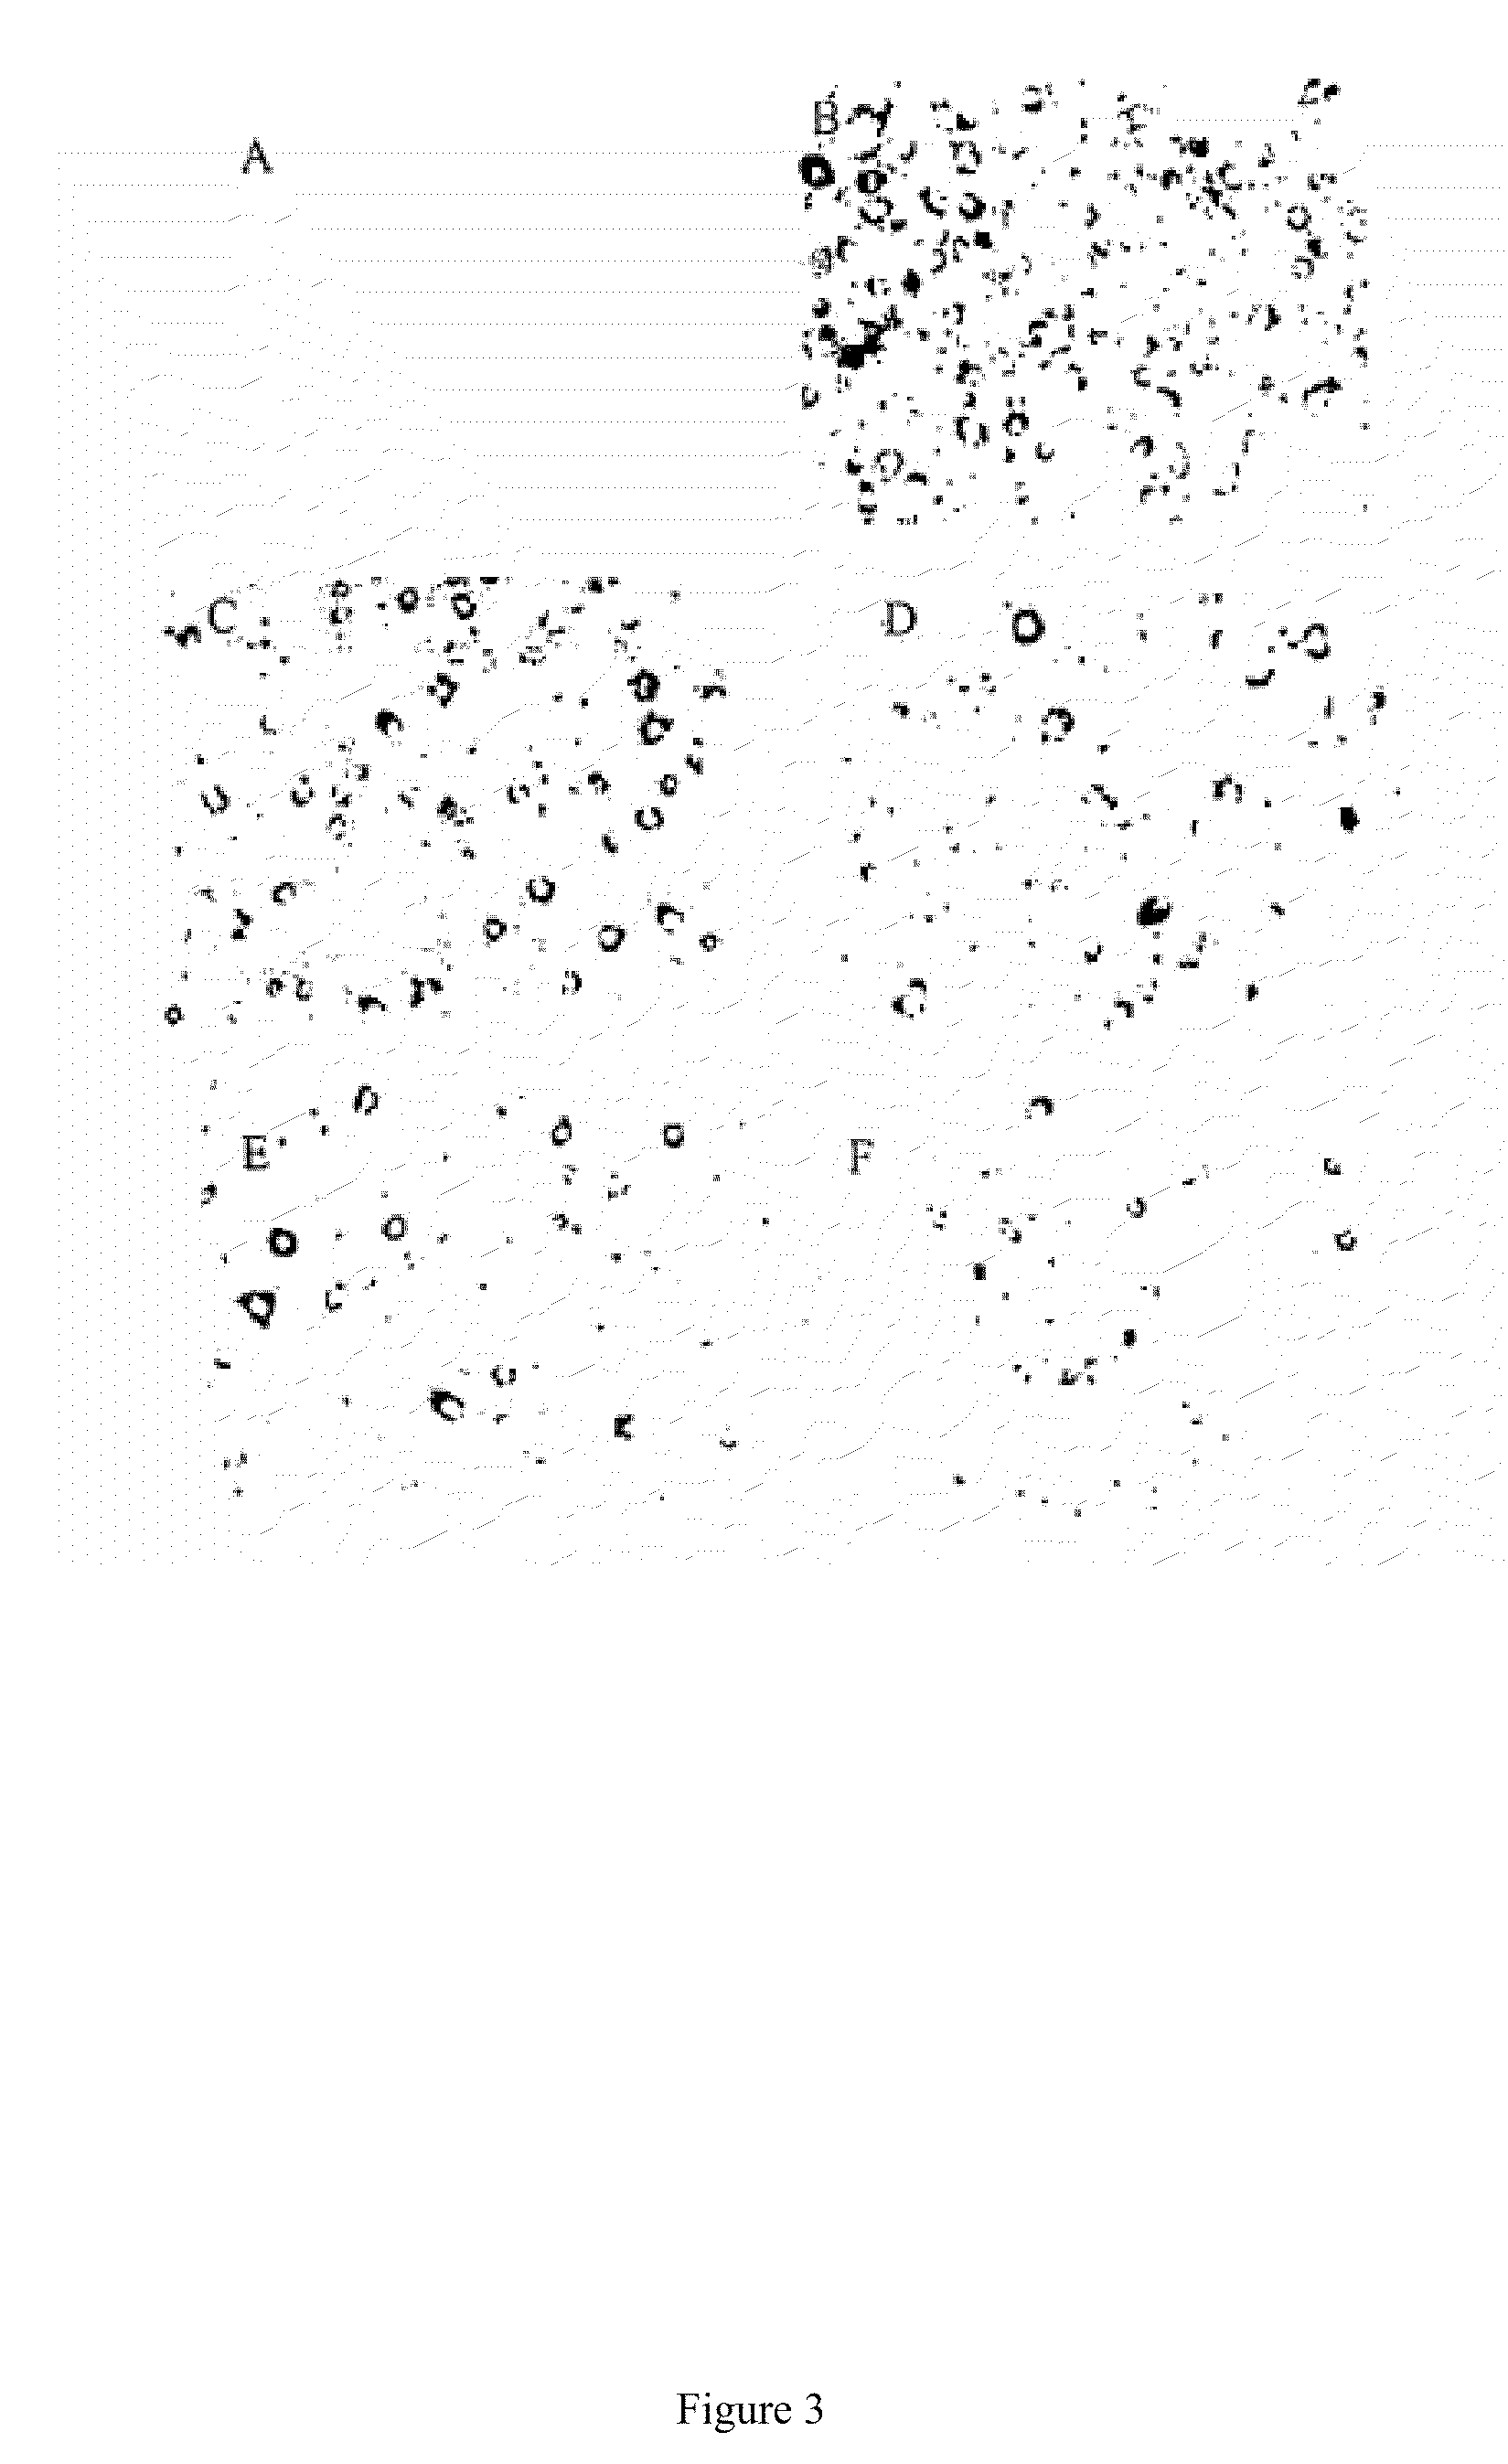 Pharmaceutical compositions containing berberine for treatment or prevention of weight gain and obesity associated with anti-psychotic drugs